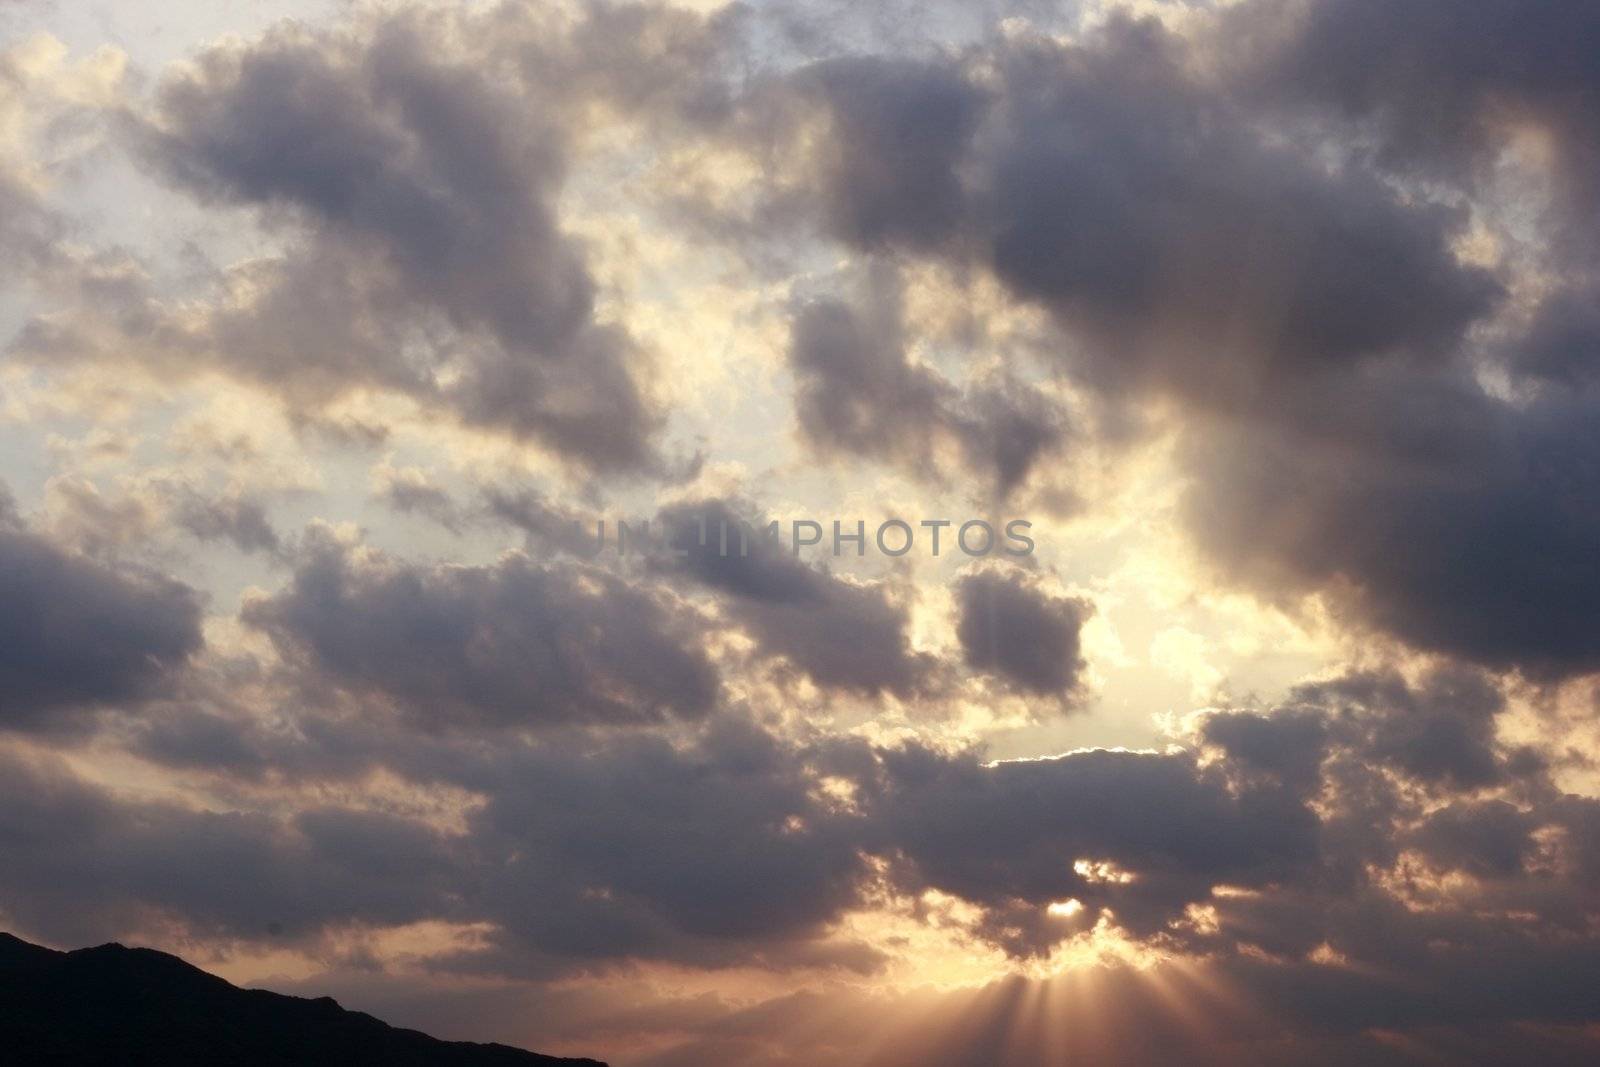 Sunset over a mountain, accentuated by storm clouds. Very clear and bright perspective with clouds layers that accentuate the horizon, while several sun rays penetrates the dark clouds. 